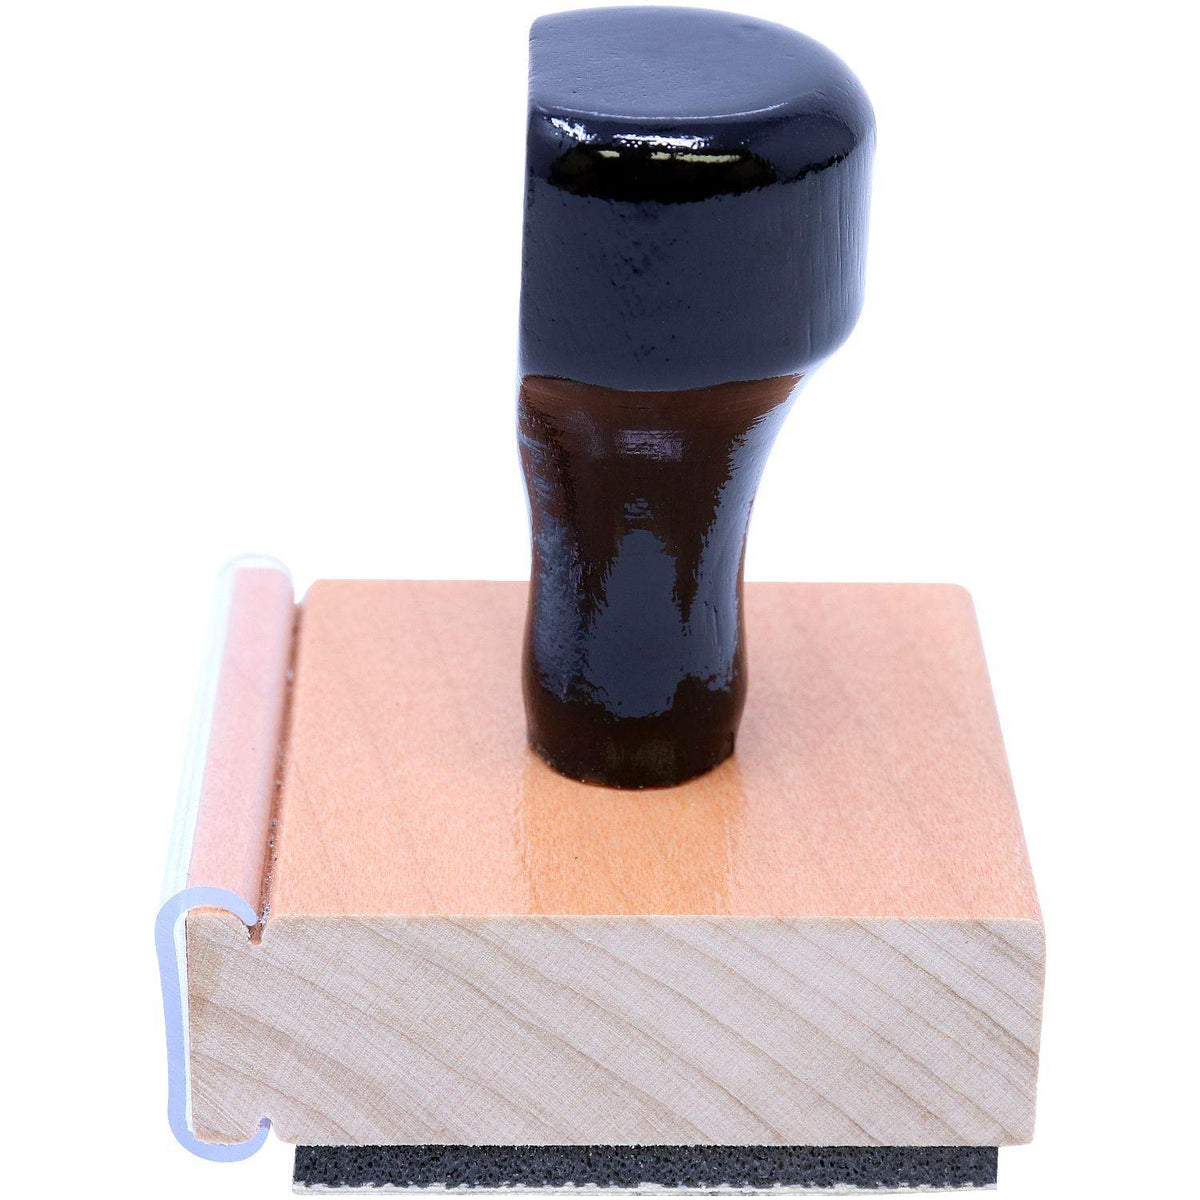 Real Estate Appraiser Regular Rubber Stamp of Seal - Engineer Seal Stamps - Stamp Type_Hand Stamp, Type of Use_Professional